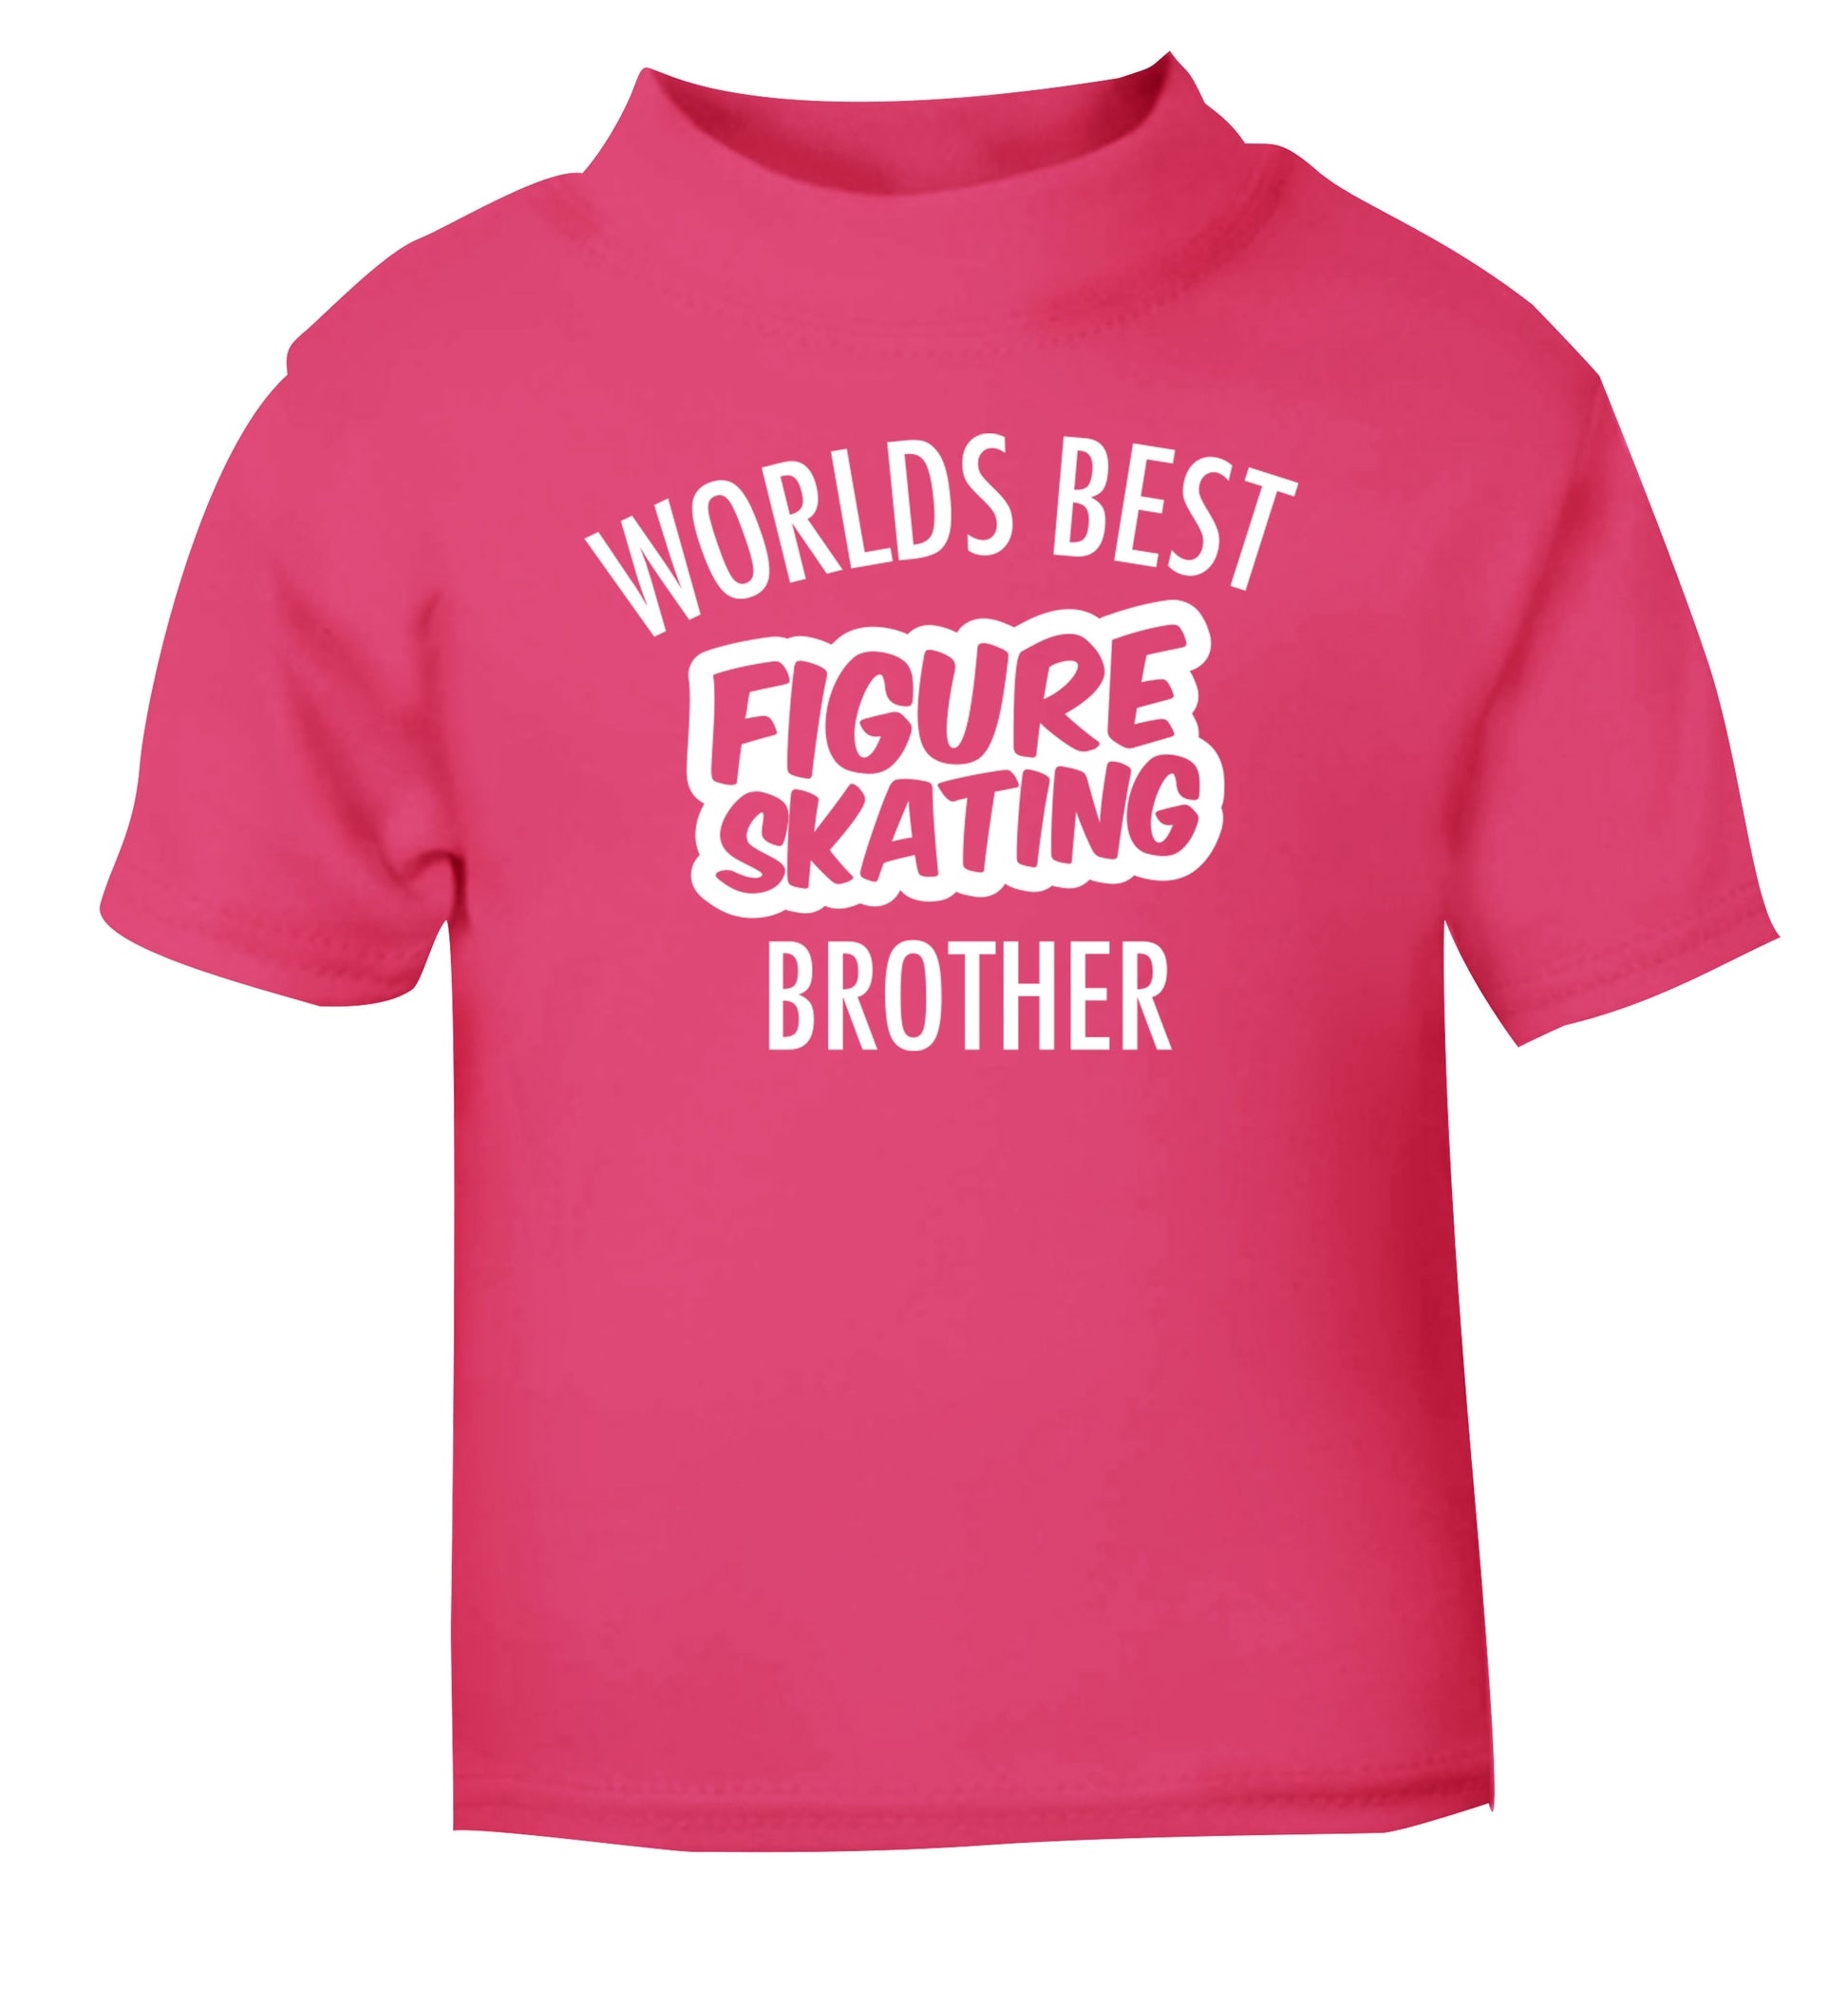 Worlds best figure skating brother pink Baby Toddler Tshirt 2 Years